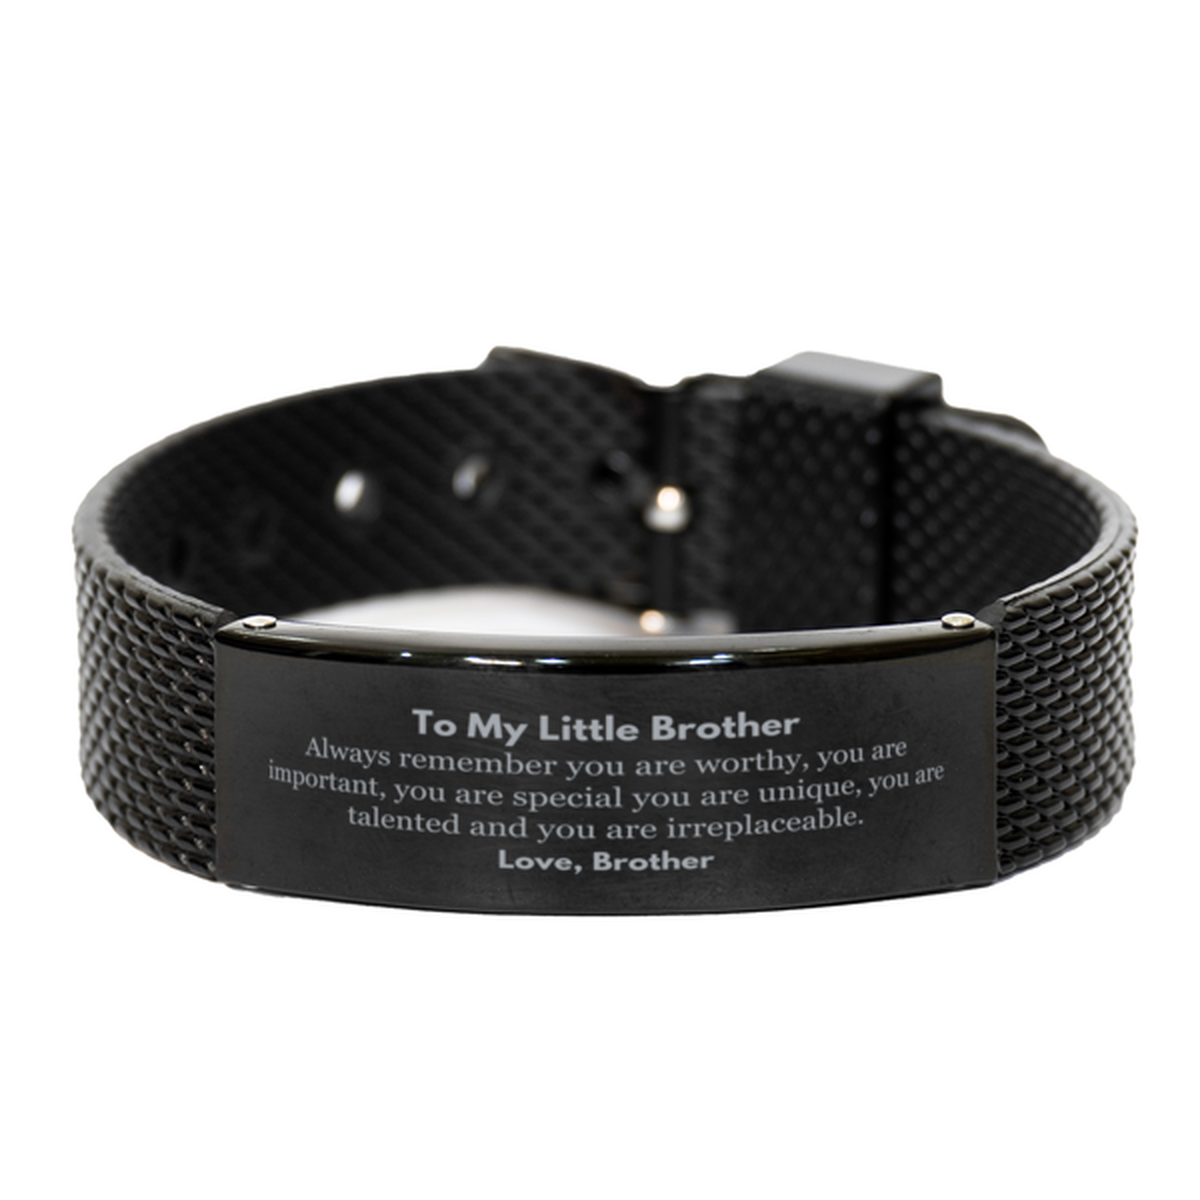 Little Brother Birthday Gifts from Brother, Inspirational Black Shark Mesh Bracelet for Little Brother Christmas Graduation Gifts for Little Brother Always remember you are worthy, you are important. Love, Brother